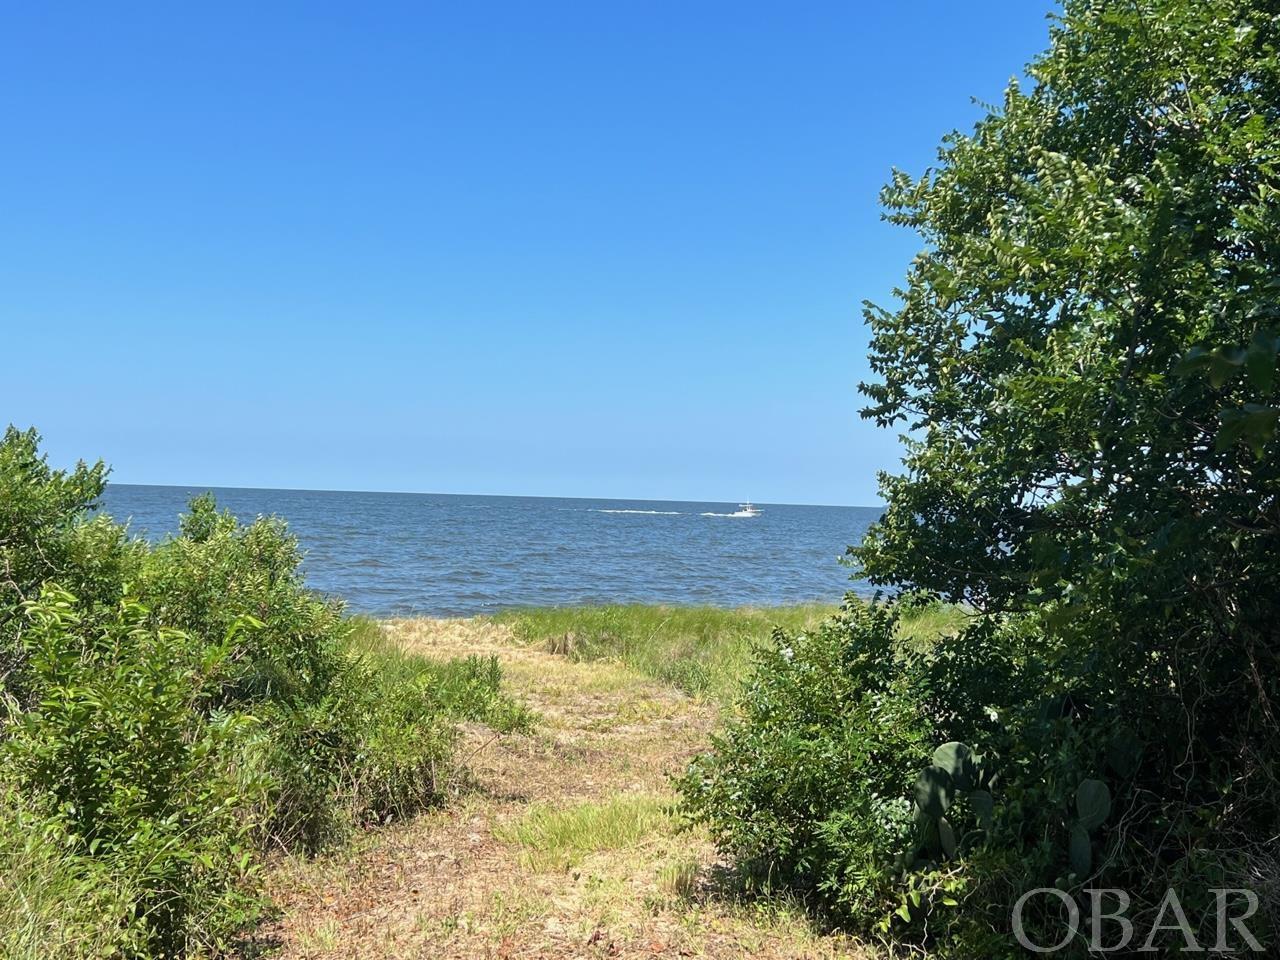 REDUCED!! PREMIER SOUNDFRONT BUILDING SITE in Colington Harbour!!  EXCELLENT ELEVATION; VERY LARGE SITE! Approx. 80 FEET OF WATER FRONTAGE W/BULKHEAD! Enjoy spectacular SUNSET VIEWS over the lovely Albemarle Sound! One of the few remaining sound front building sites on on the Outer Banks!! Build your dream home & experience waterfront living at it's finest! Boat, kayak, paddleboard, swim, fish crab from your back yard! Clipper Ct. is a quiet cul-de-sac is just minutes to the fabulous community amenities: Marina, boat ramp, huge sound side park with sandy beaches, playground & covered picnic areas!  For a nominal fee, join the Colington Harbour Yacht & Racquet Club and enjoy the Olympic size salt-water pool, kiddie pool, tennis courts, community clubhouse w/fun activities!